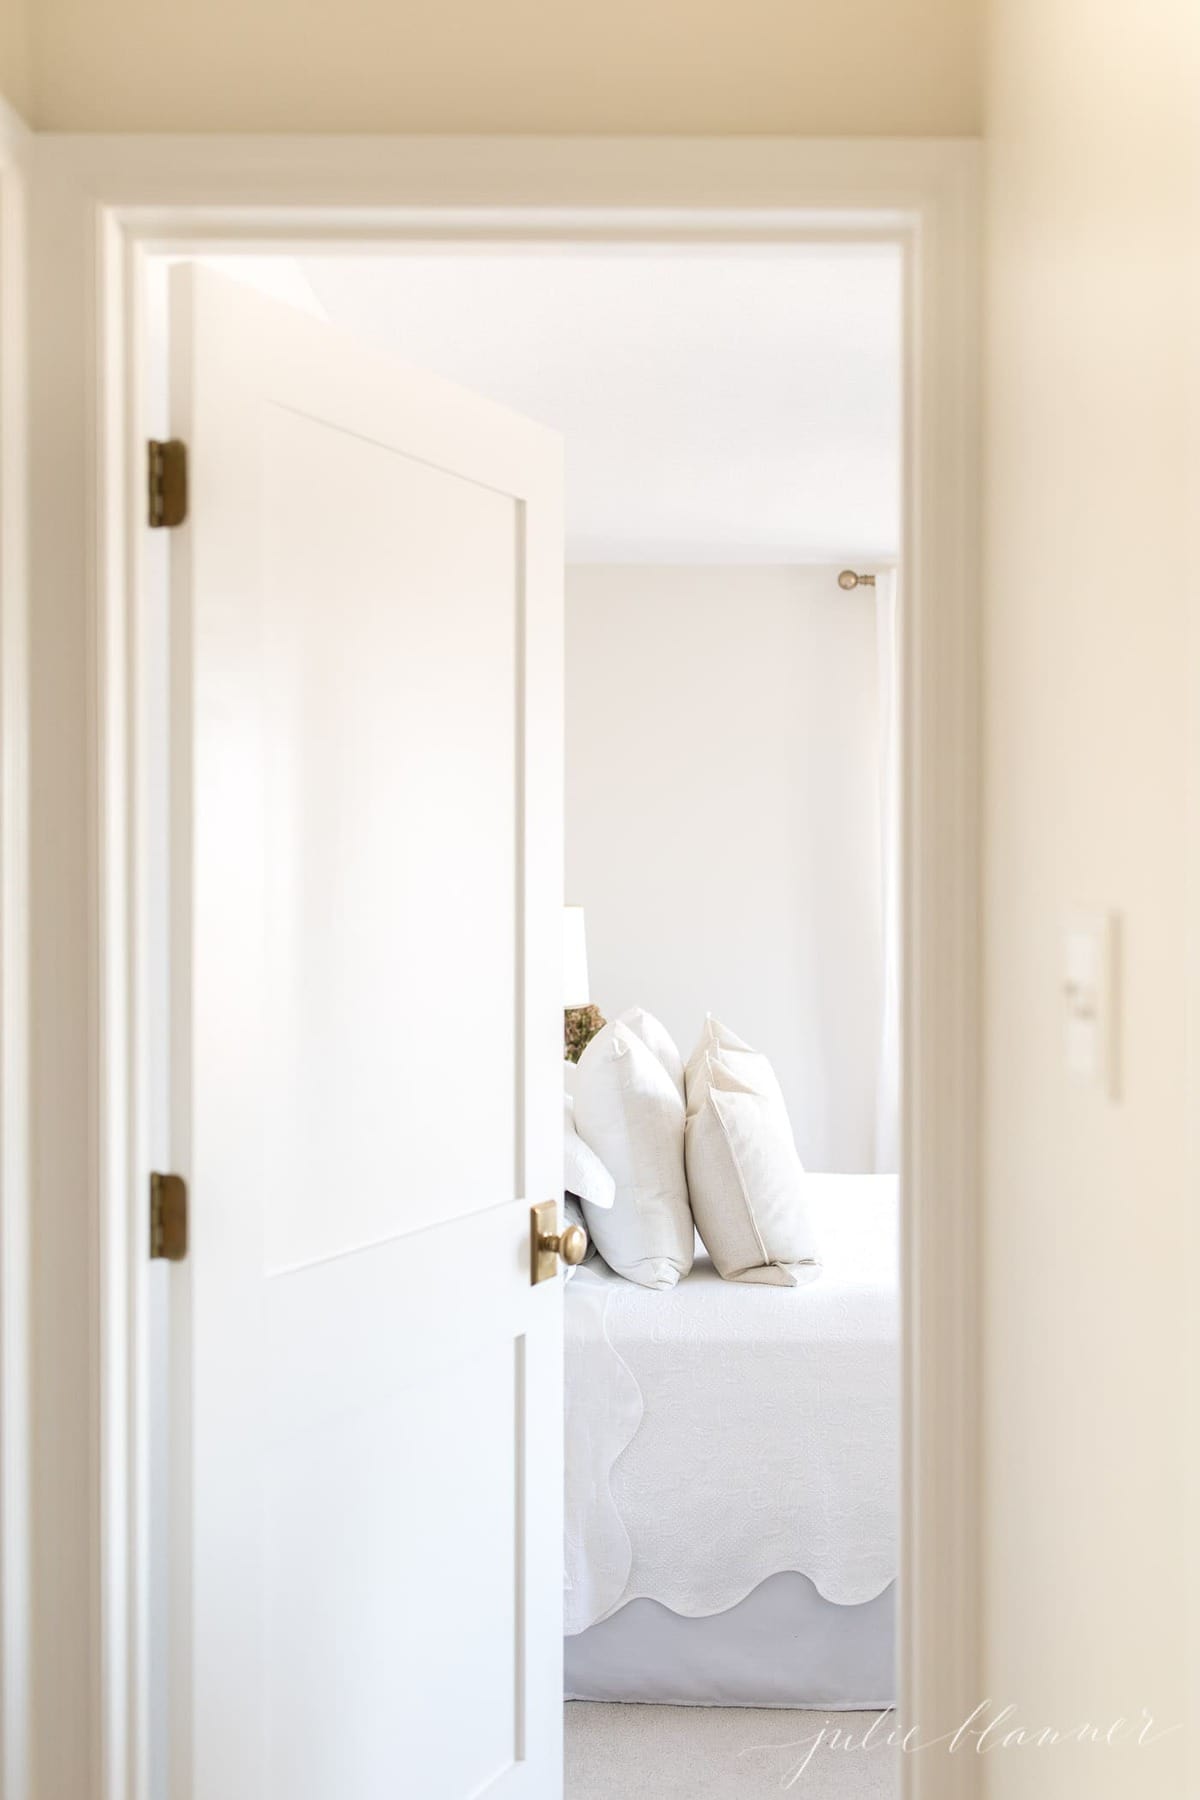 A white door opening into a white bedroom